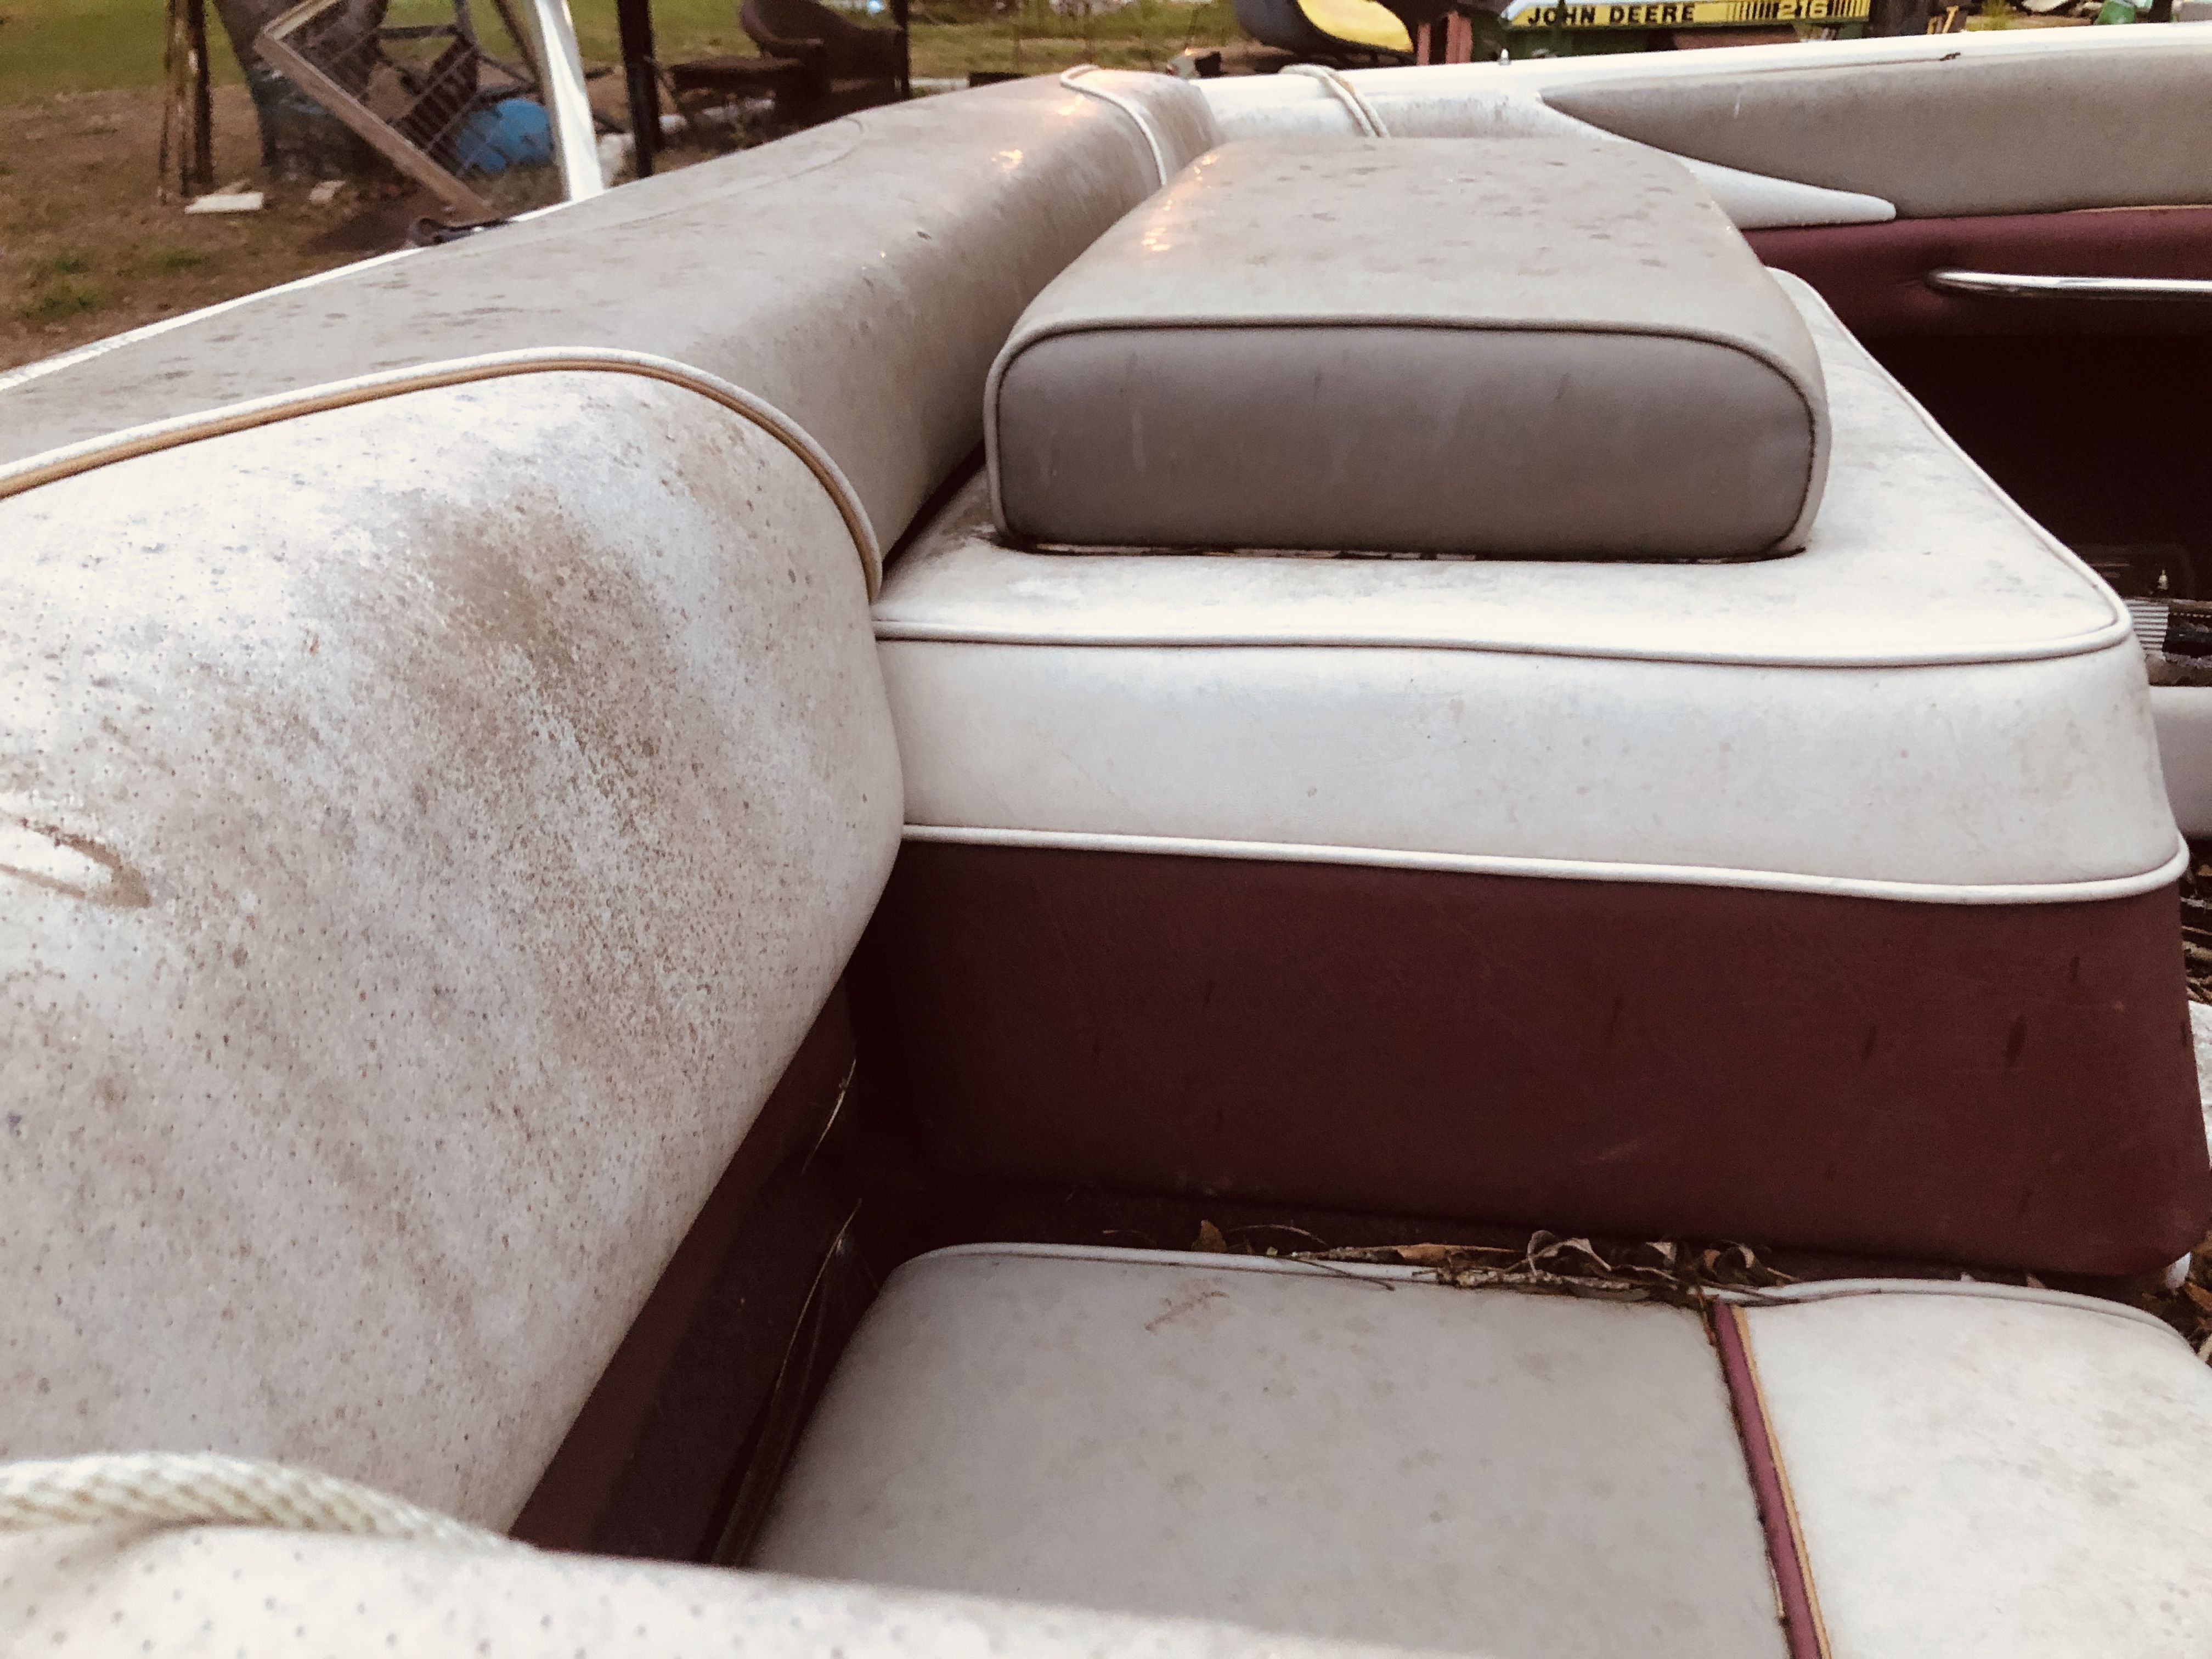 WHY DOES MOLD GROW ON YOUR BOAT SEATS?